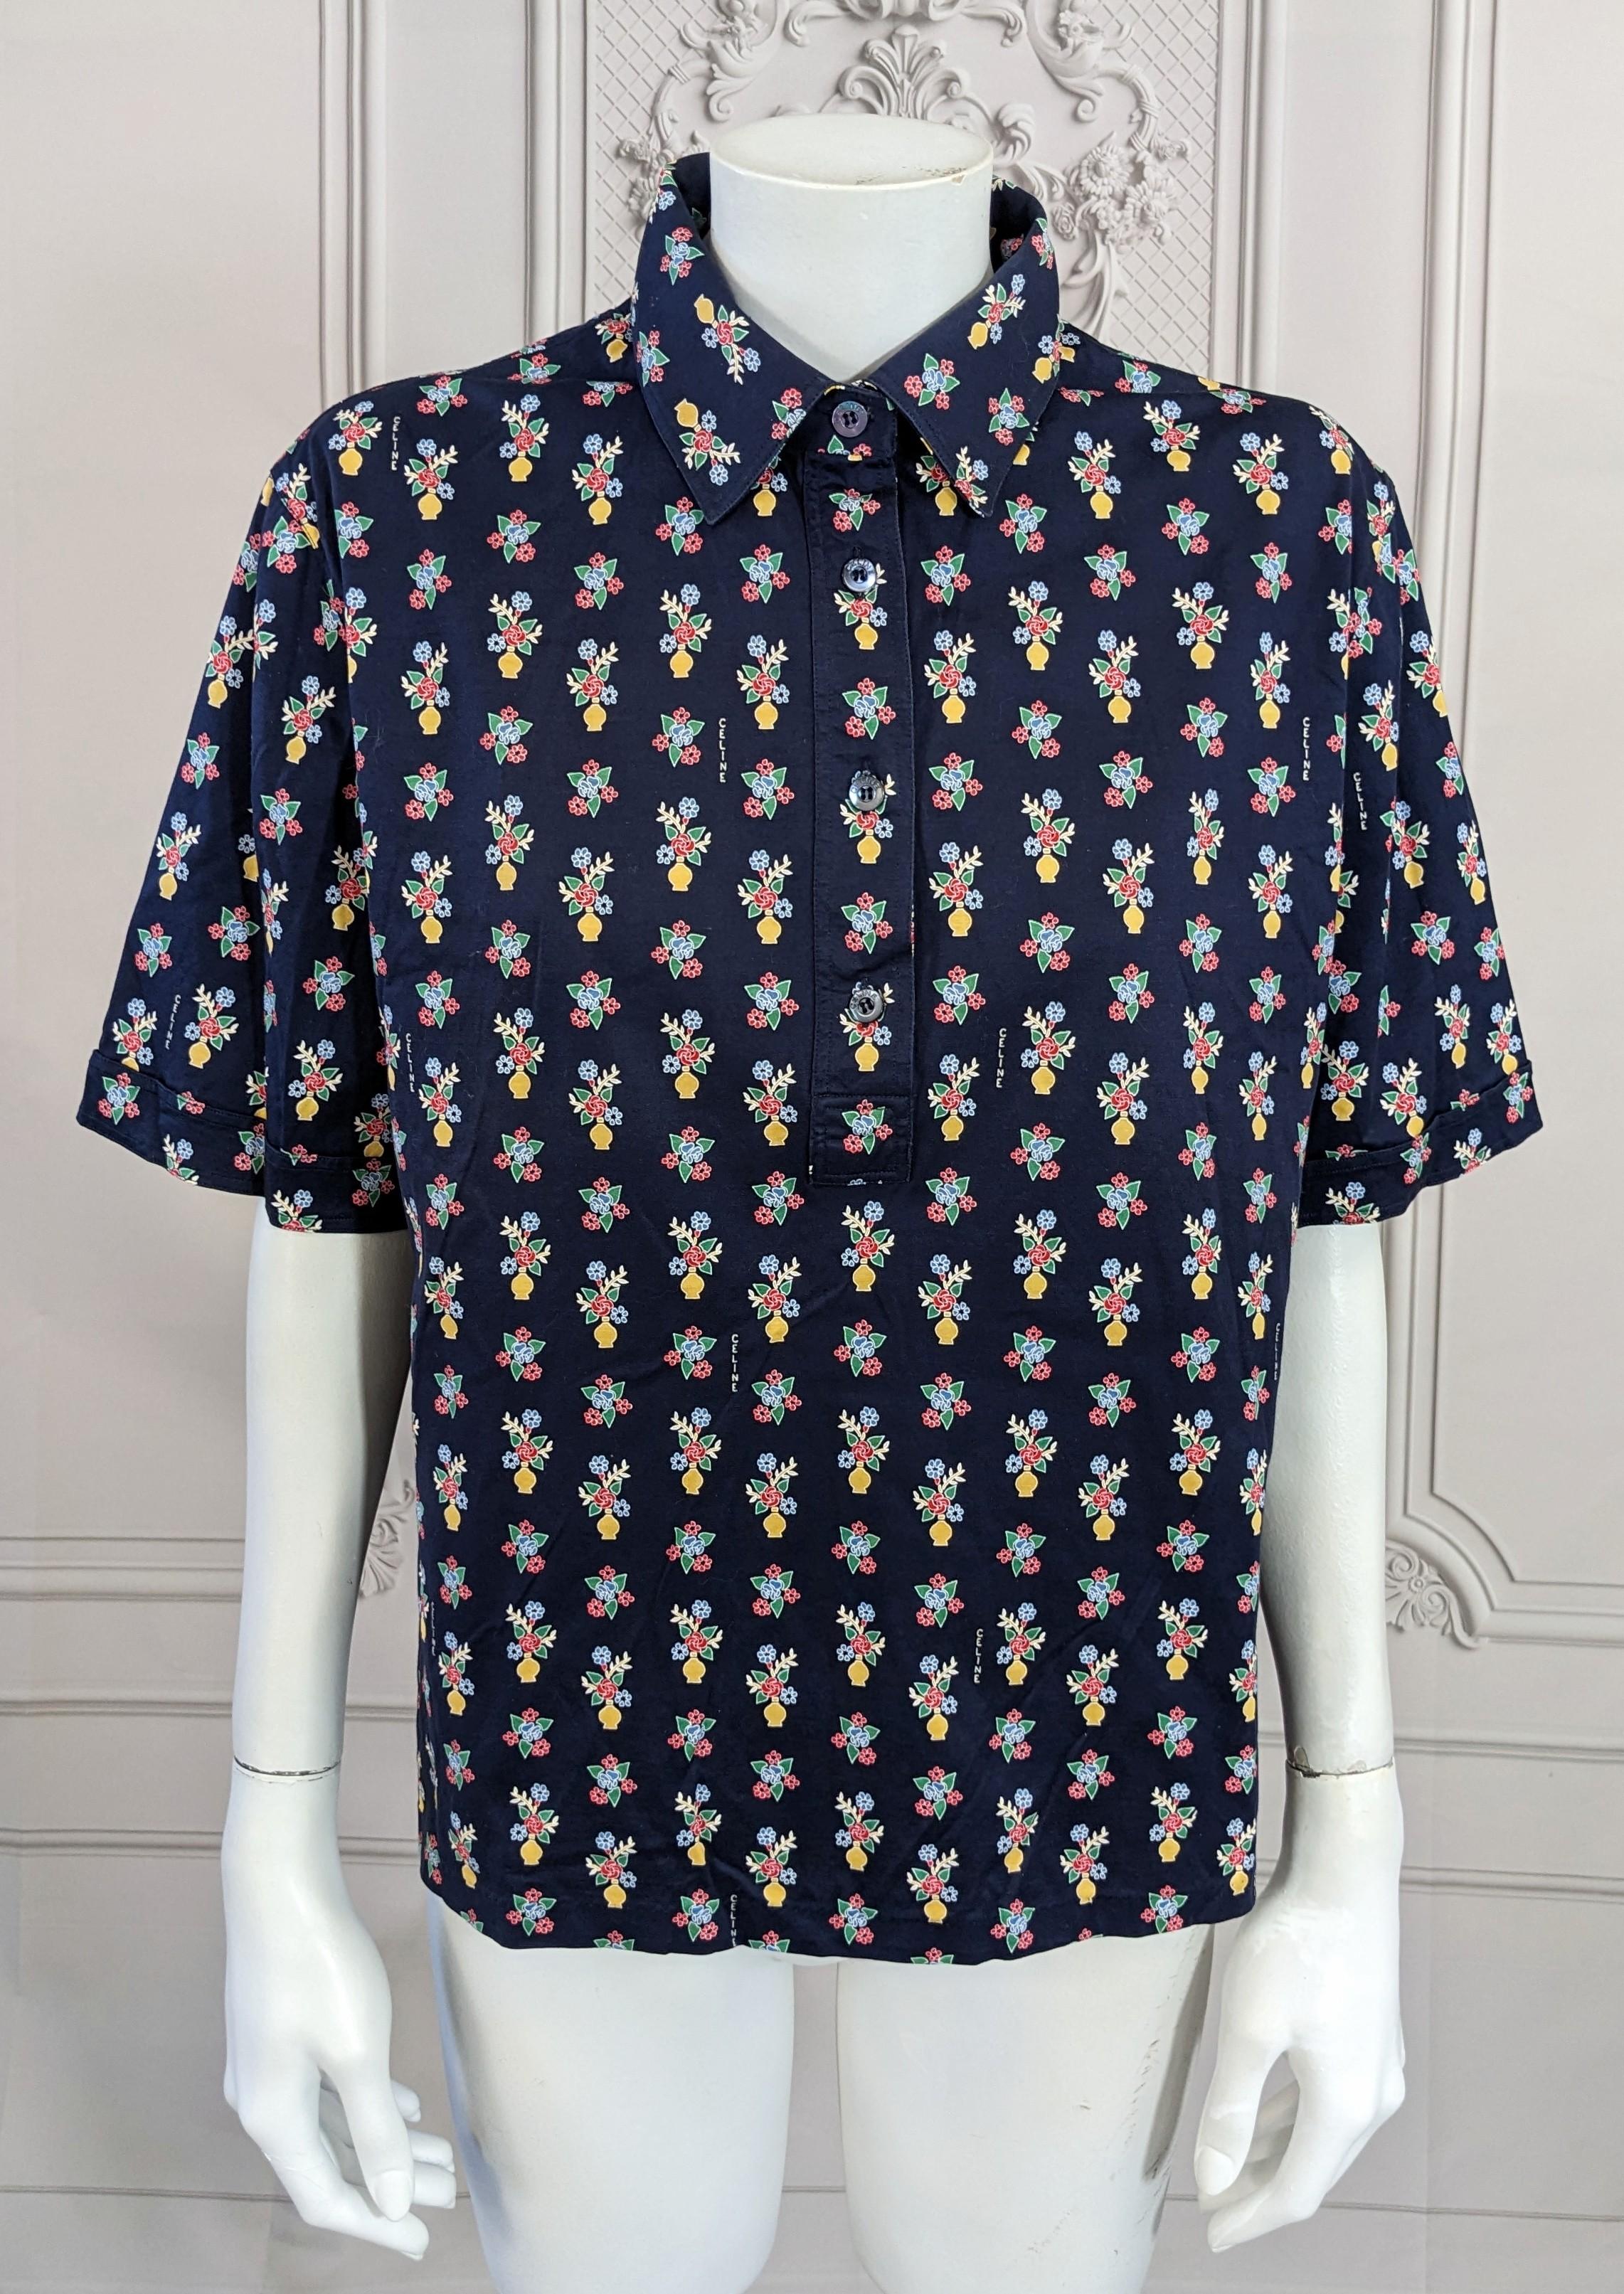 Celine cotton short sleeved polo of deep navy blue cotton lisle overall printed with floral bouquets and flower vases, in yellow, red, blues and greens. Logo signed Celine inside the print with mother of pearl Celine buttons. Very Good Condition.